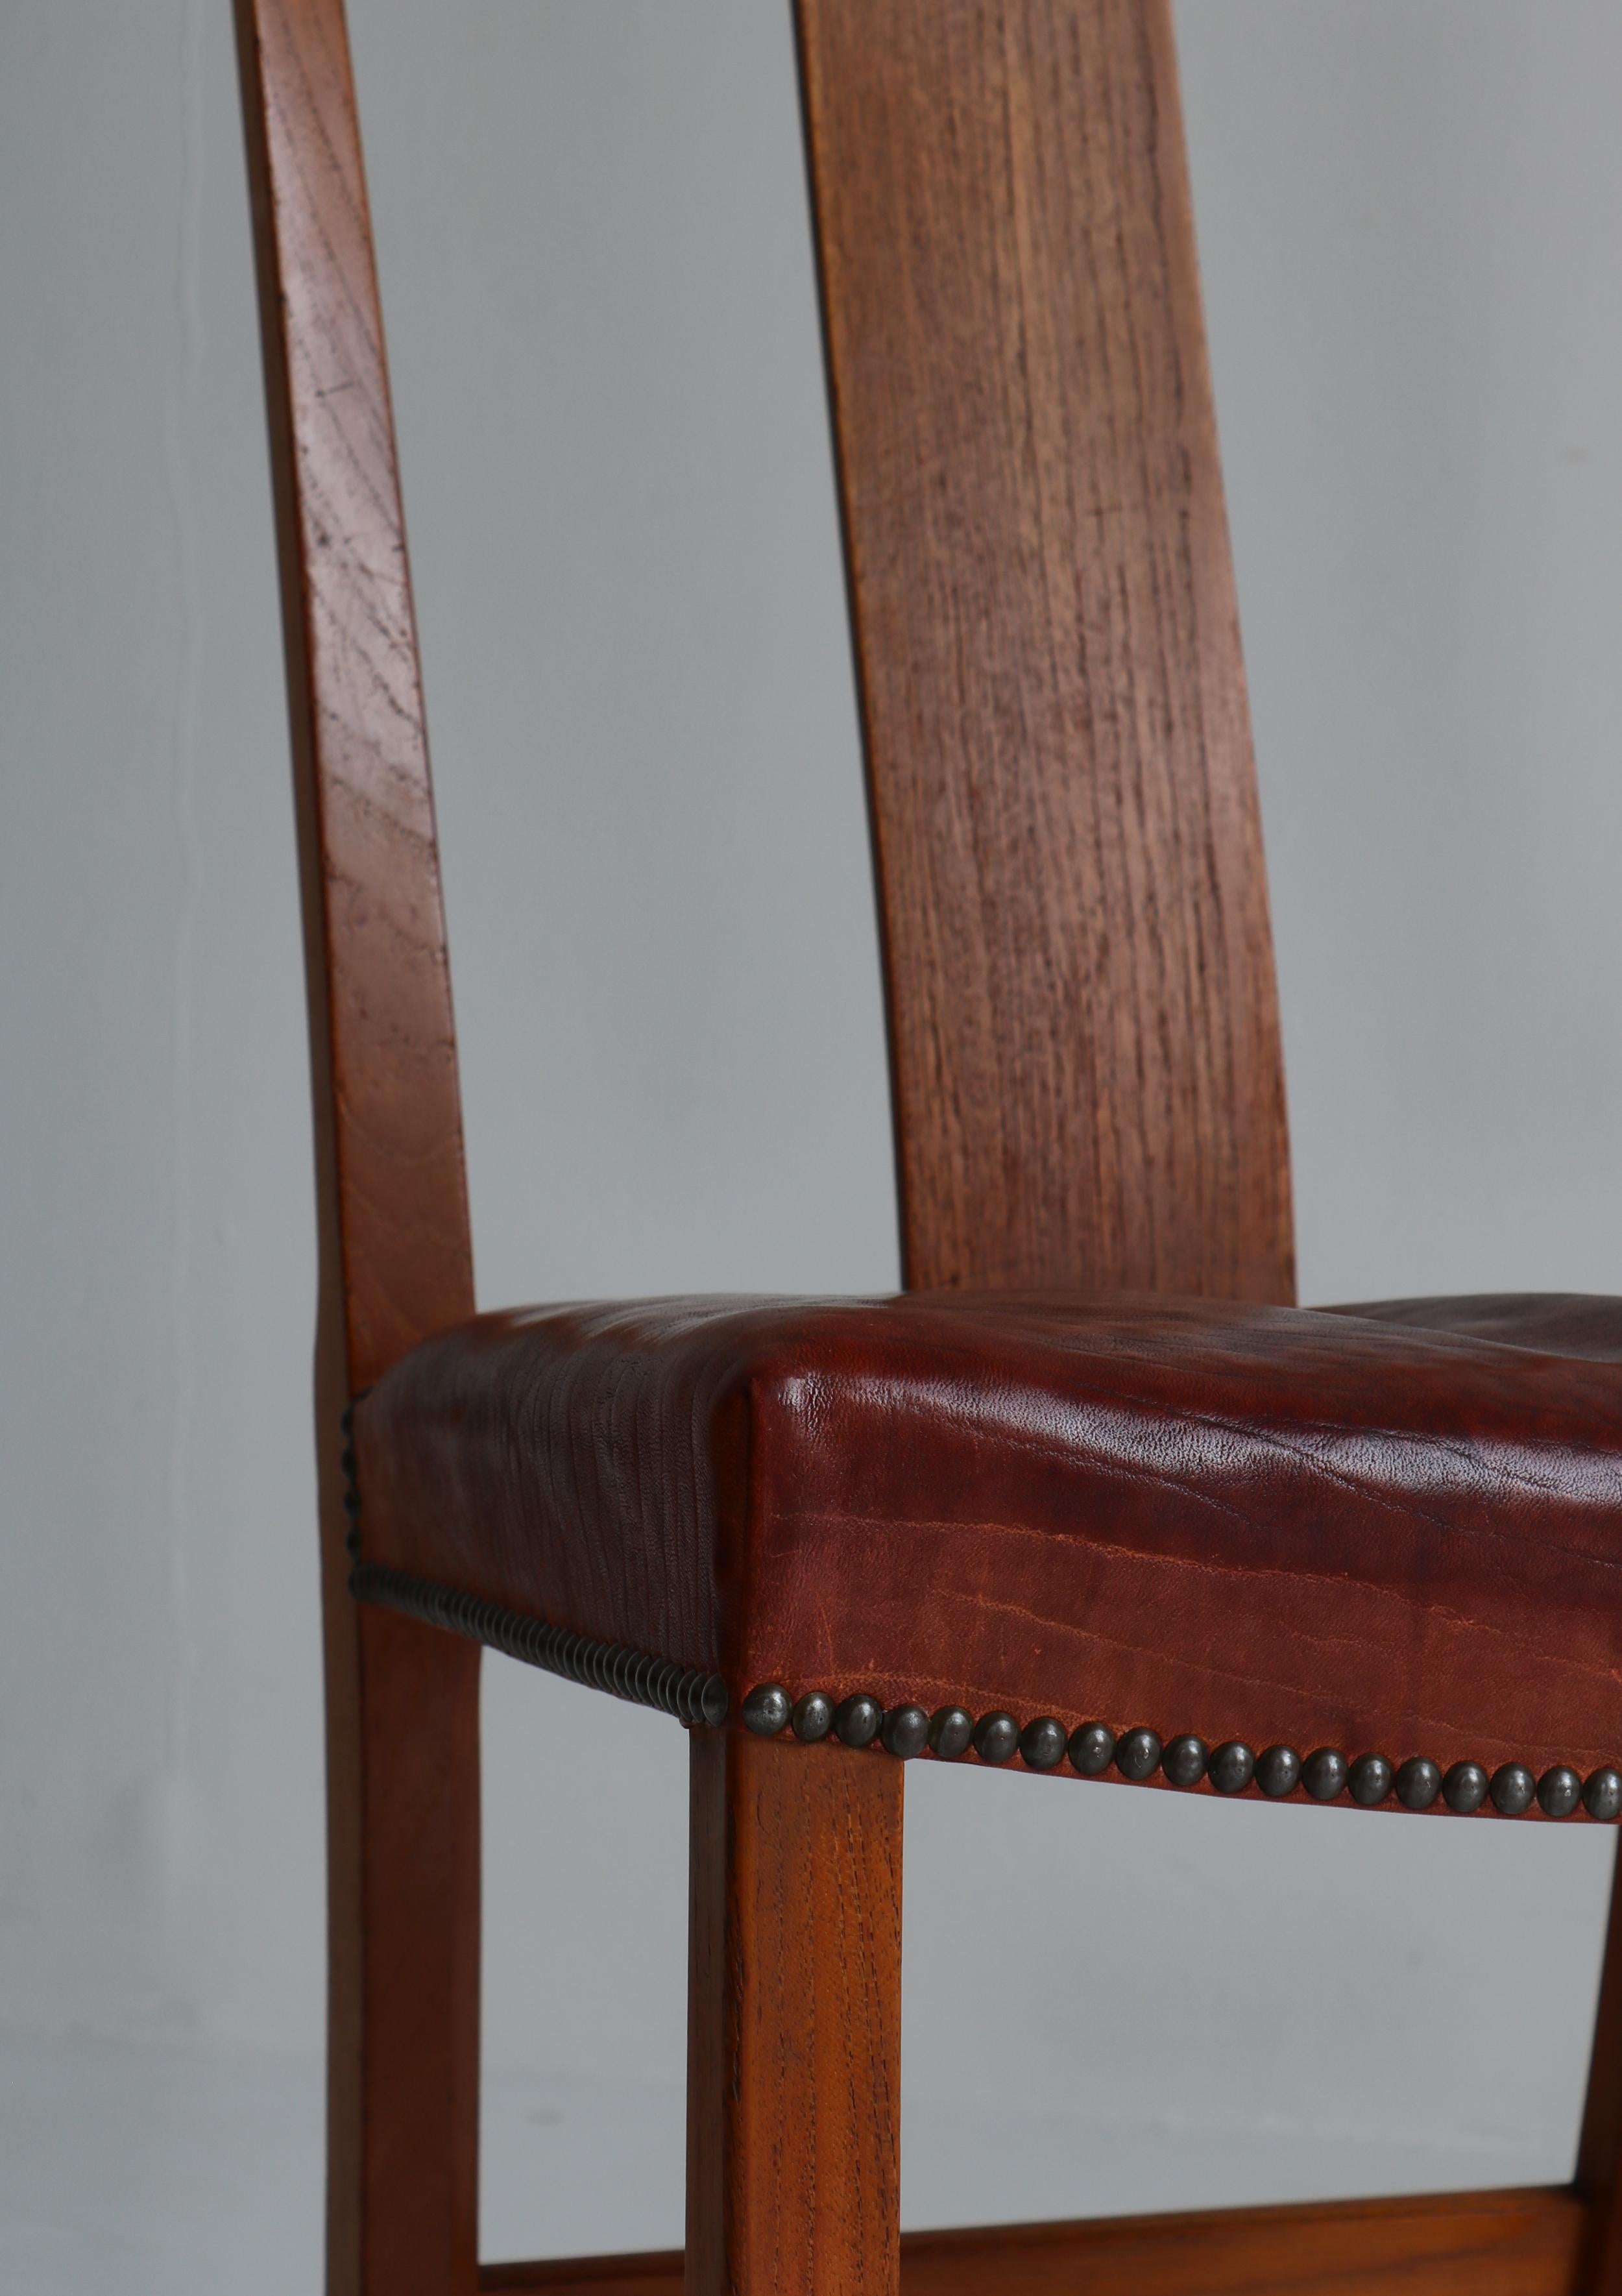 Set of Six Børge Mogensen Dining Chairs in Teak & Niger Leather, 1939, Denmark For Sale 9